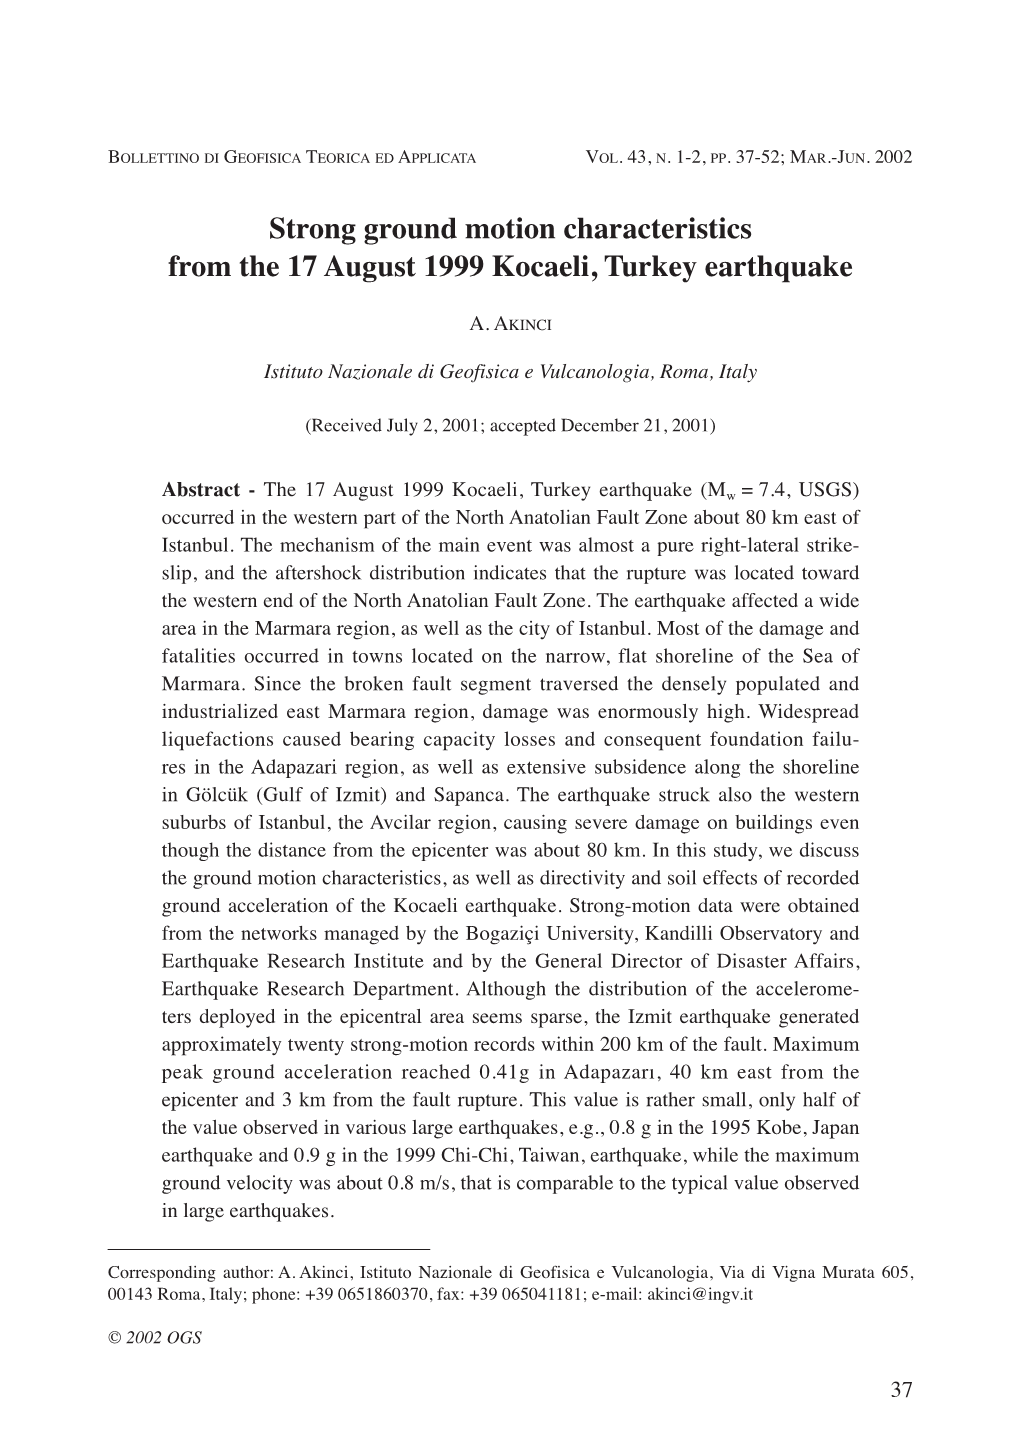 Strong Ground Motion Characteristics from the 17 August 1999 Kocaeli, Turkey Earthquake